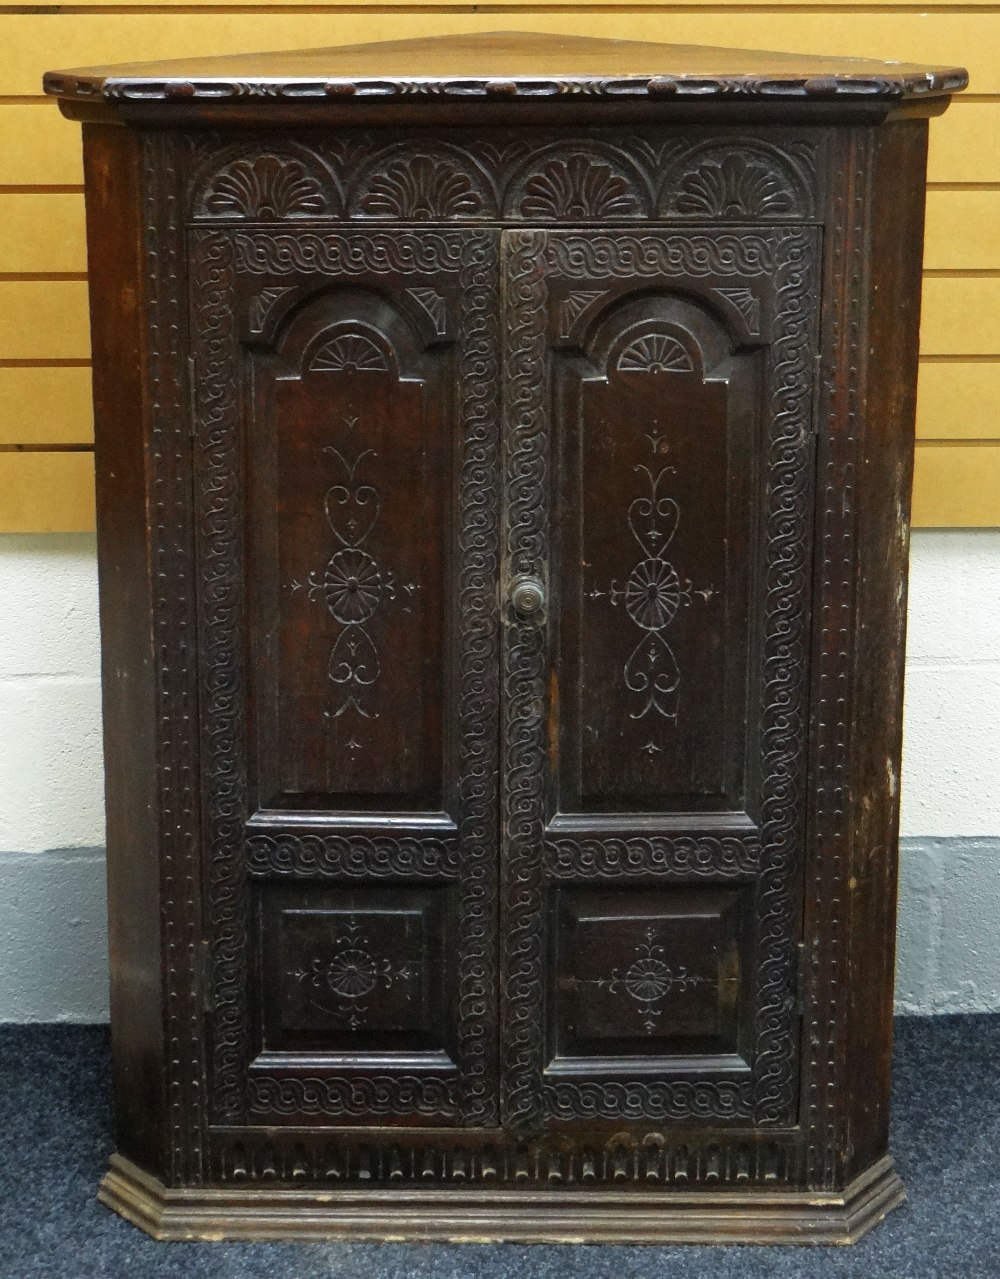 AN EARLY NINETEENTH CENTURY CARVED OAK CORNER CUPBOARD composed of two unglazed doors decorated with